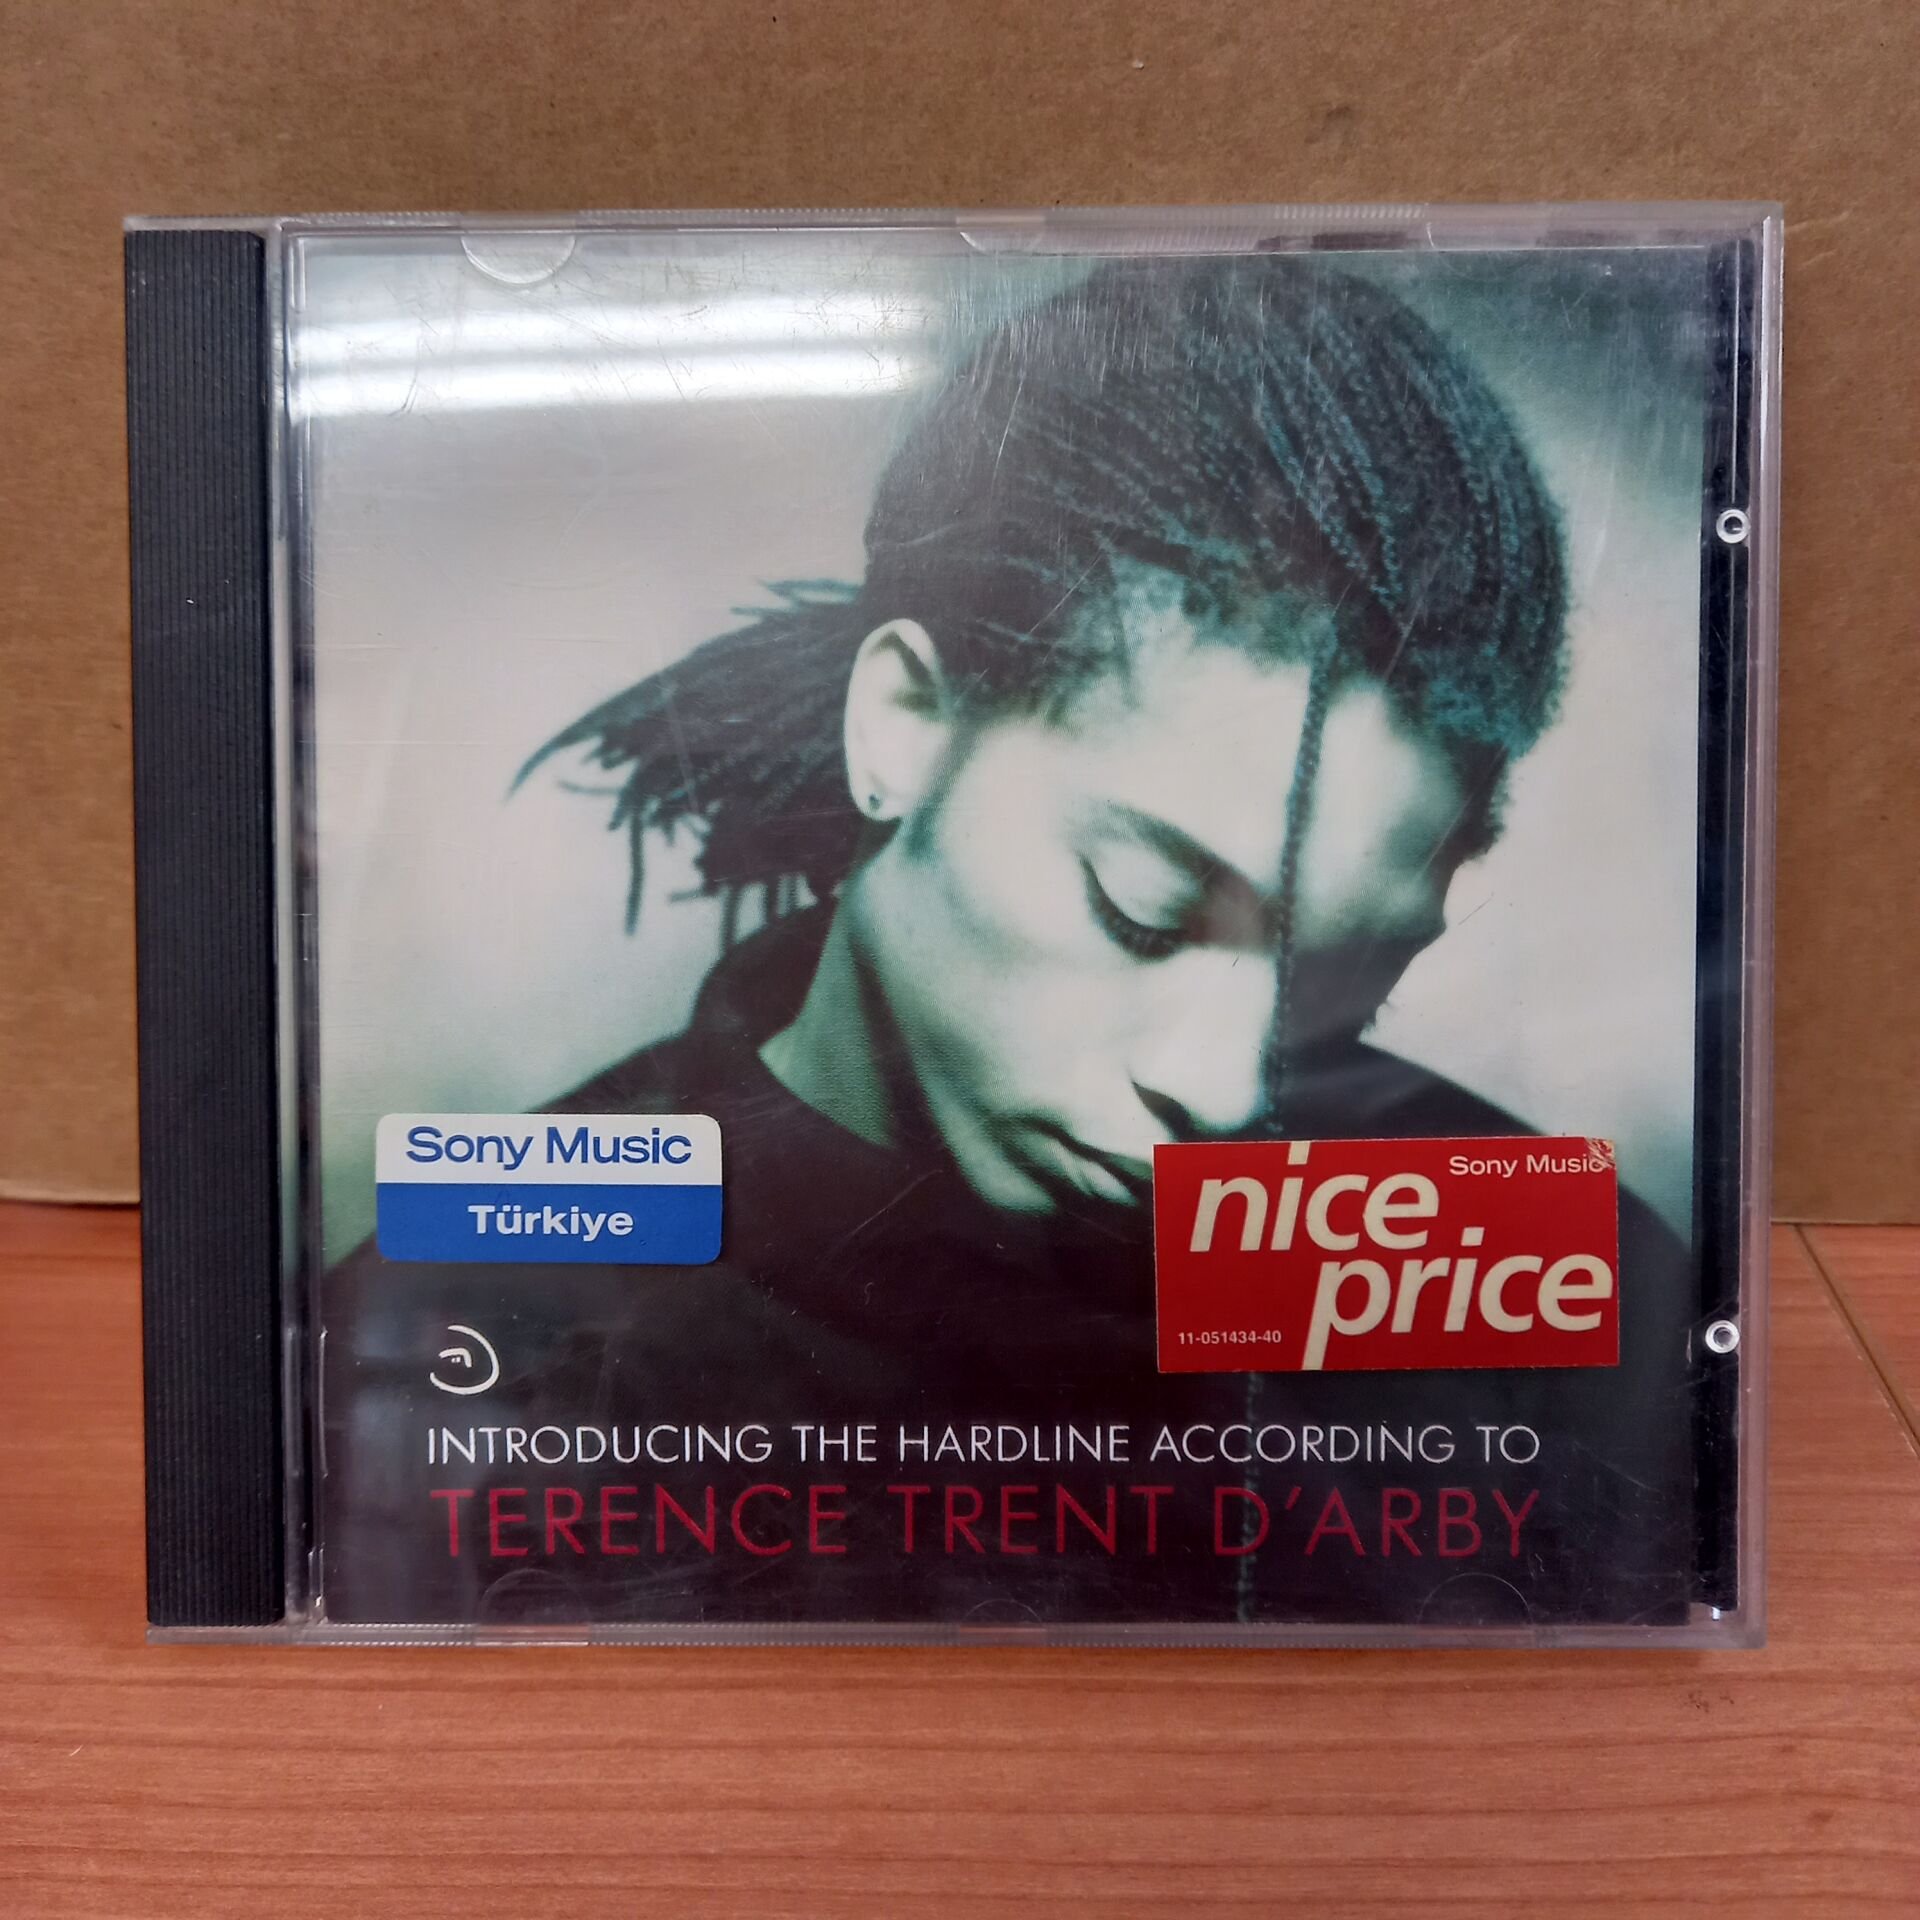 TERENCE TRENT D'ARBY - INTRODUCING THE HARDLINE ACCORDING TO TERENCE TRENT D'ARBY (1987) - CD 2. EL